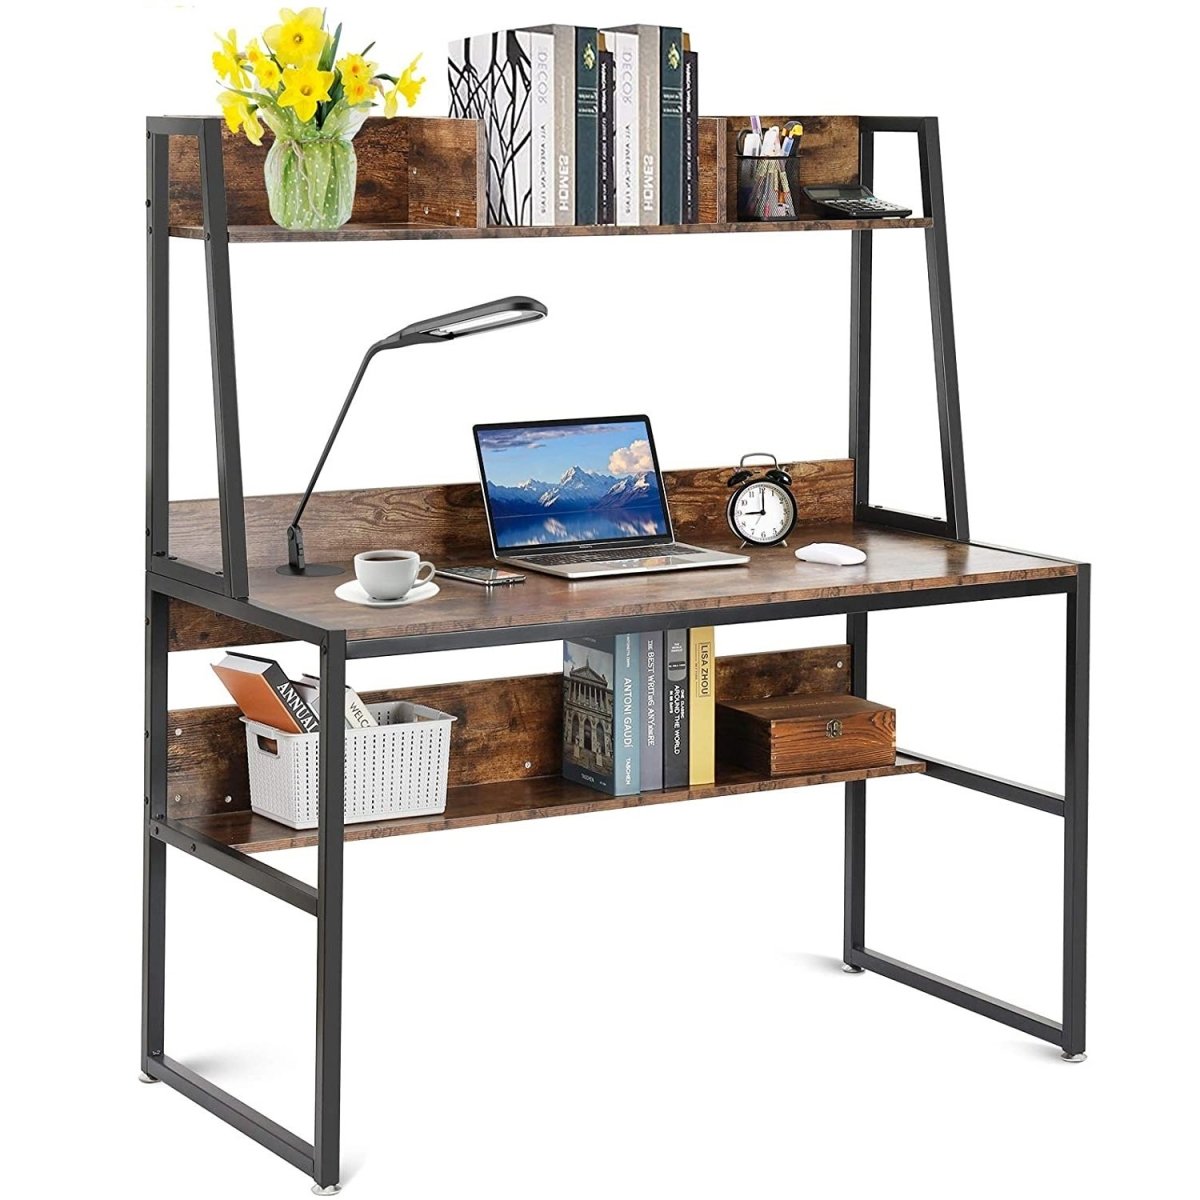 Computer Table Desk Book Storage Student Study Home Office Rustic Brown